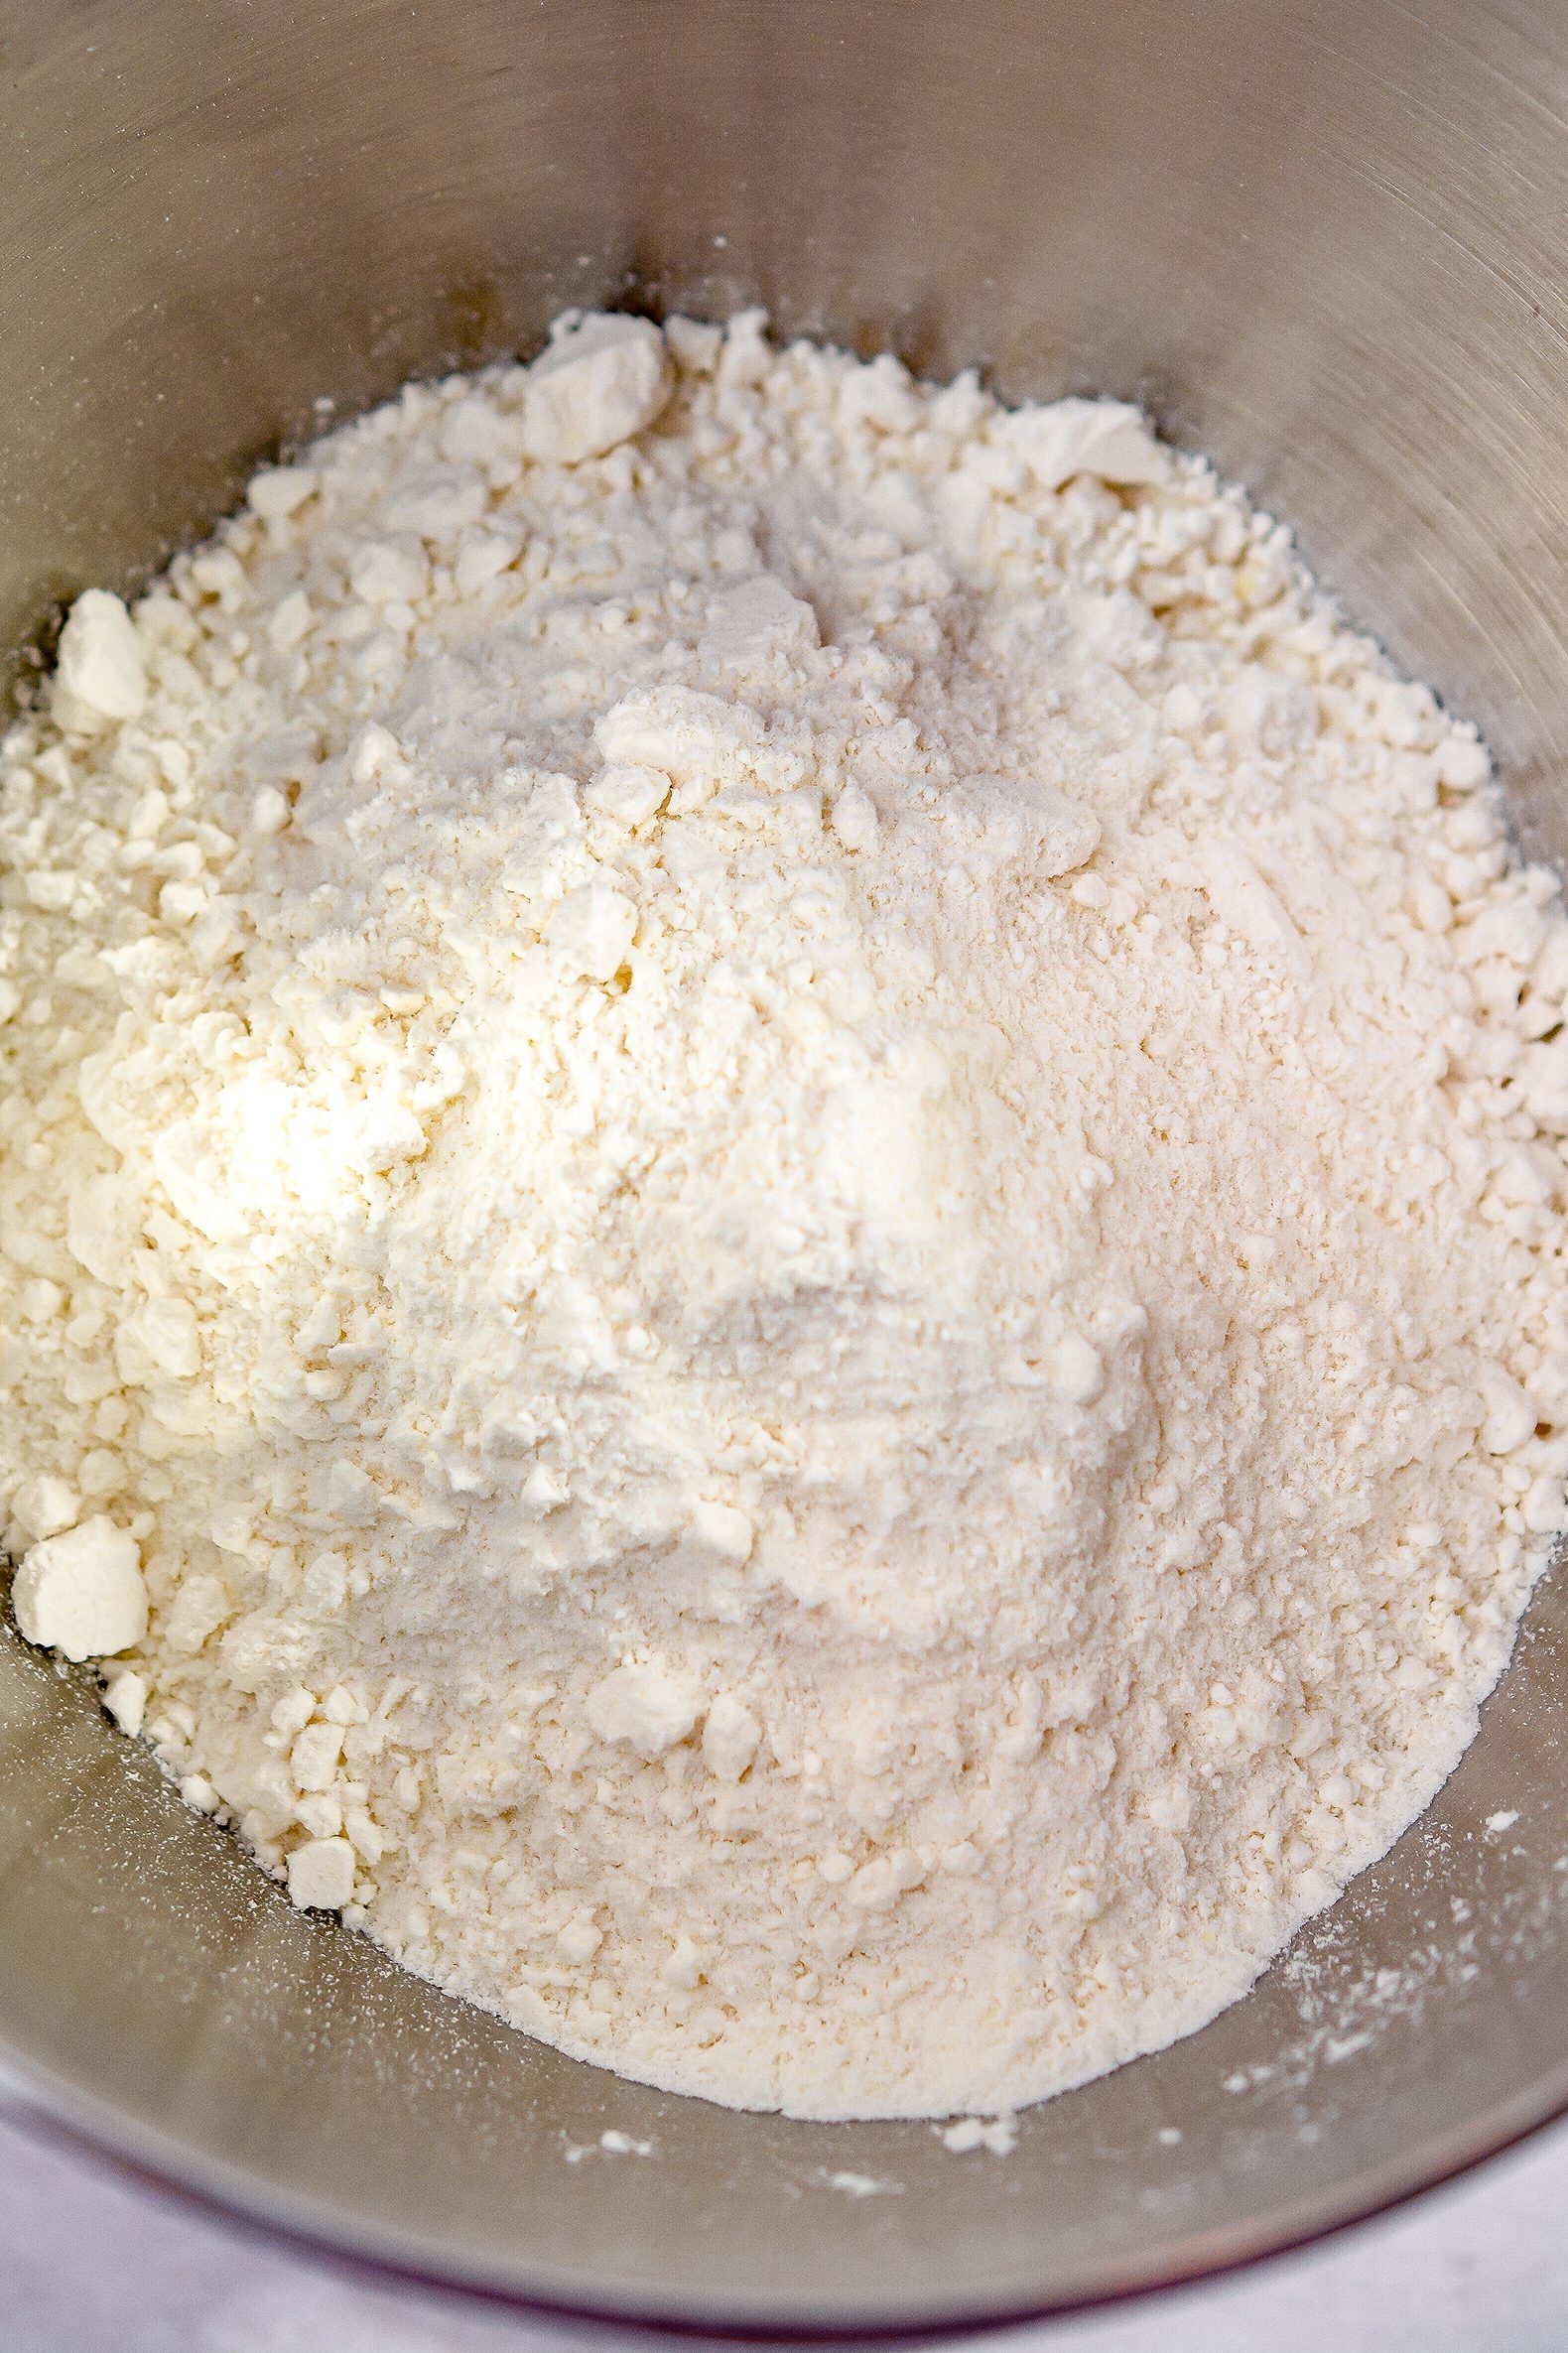 In a mixing bowl, beat together the cake mix, sour cream, oil, eggs, and ¼ cup of milk until smooth.